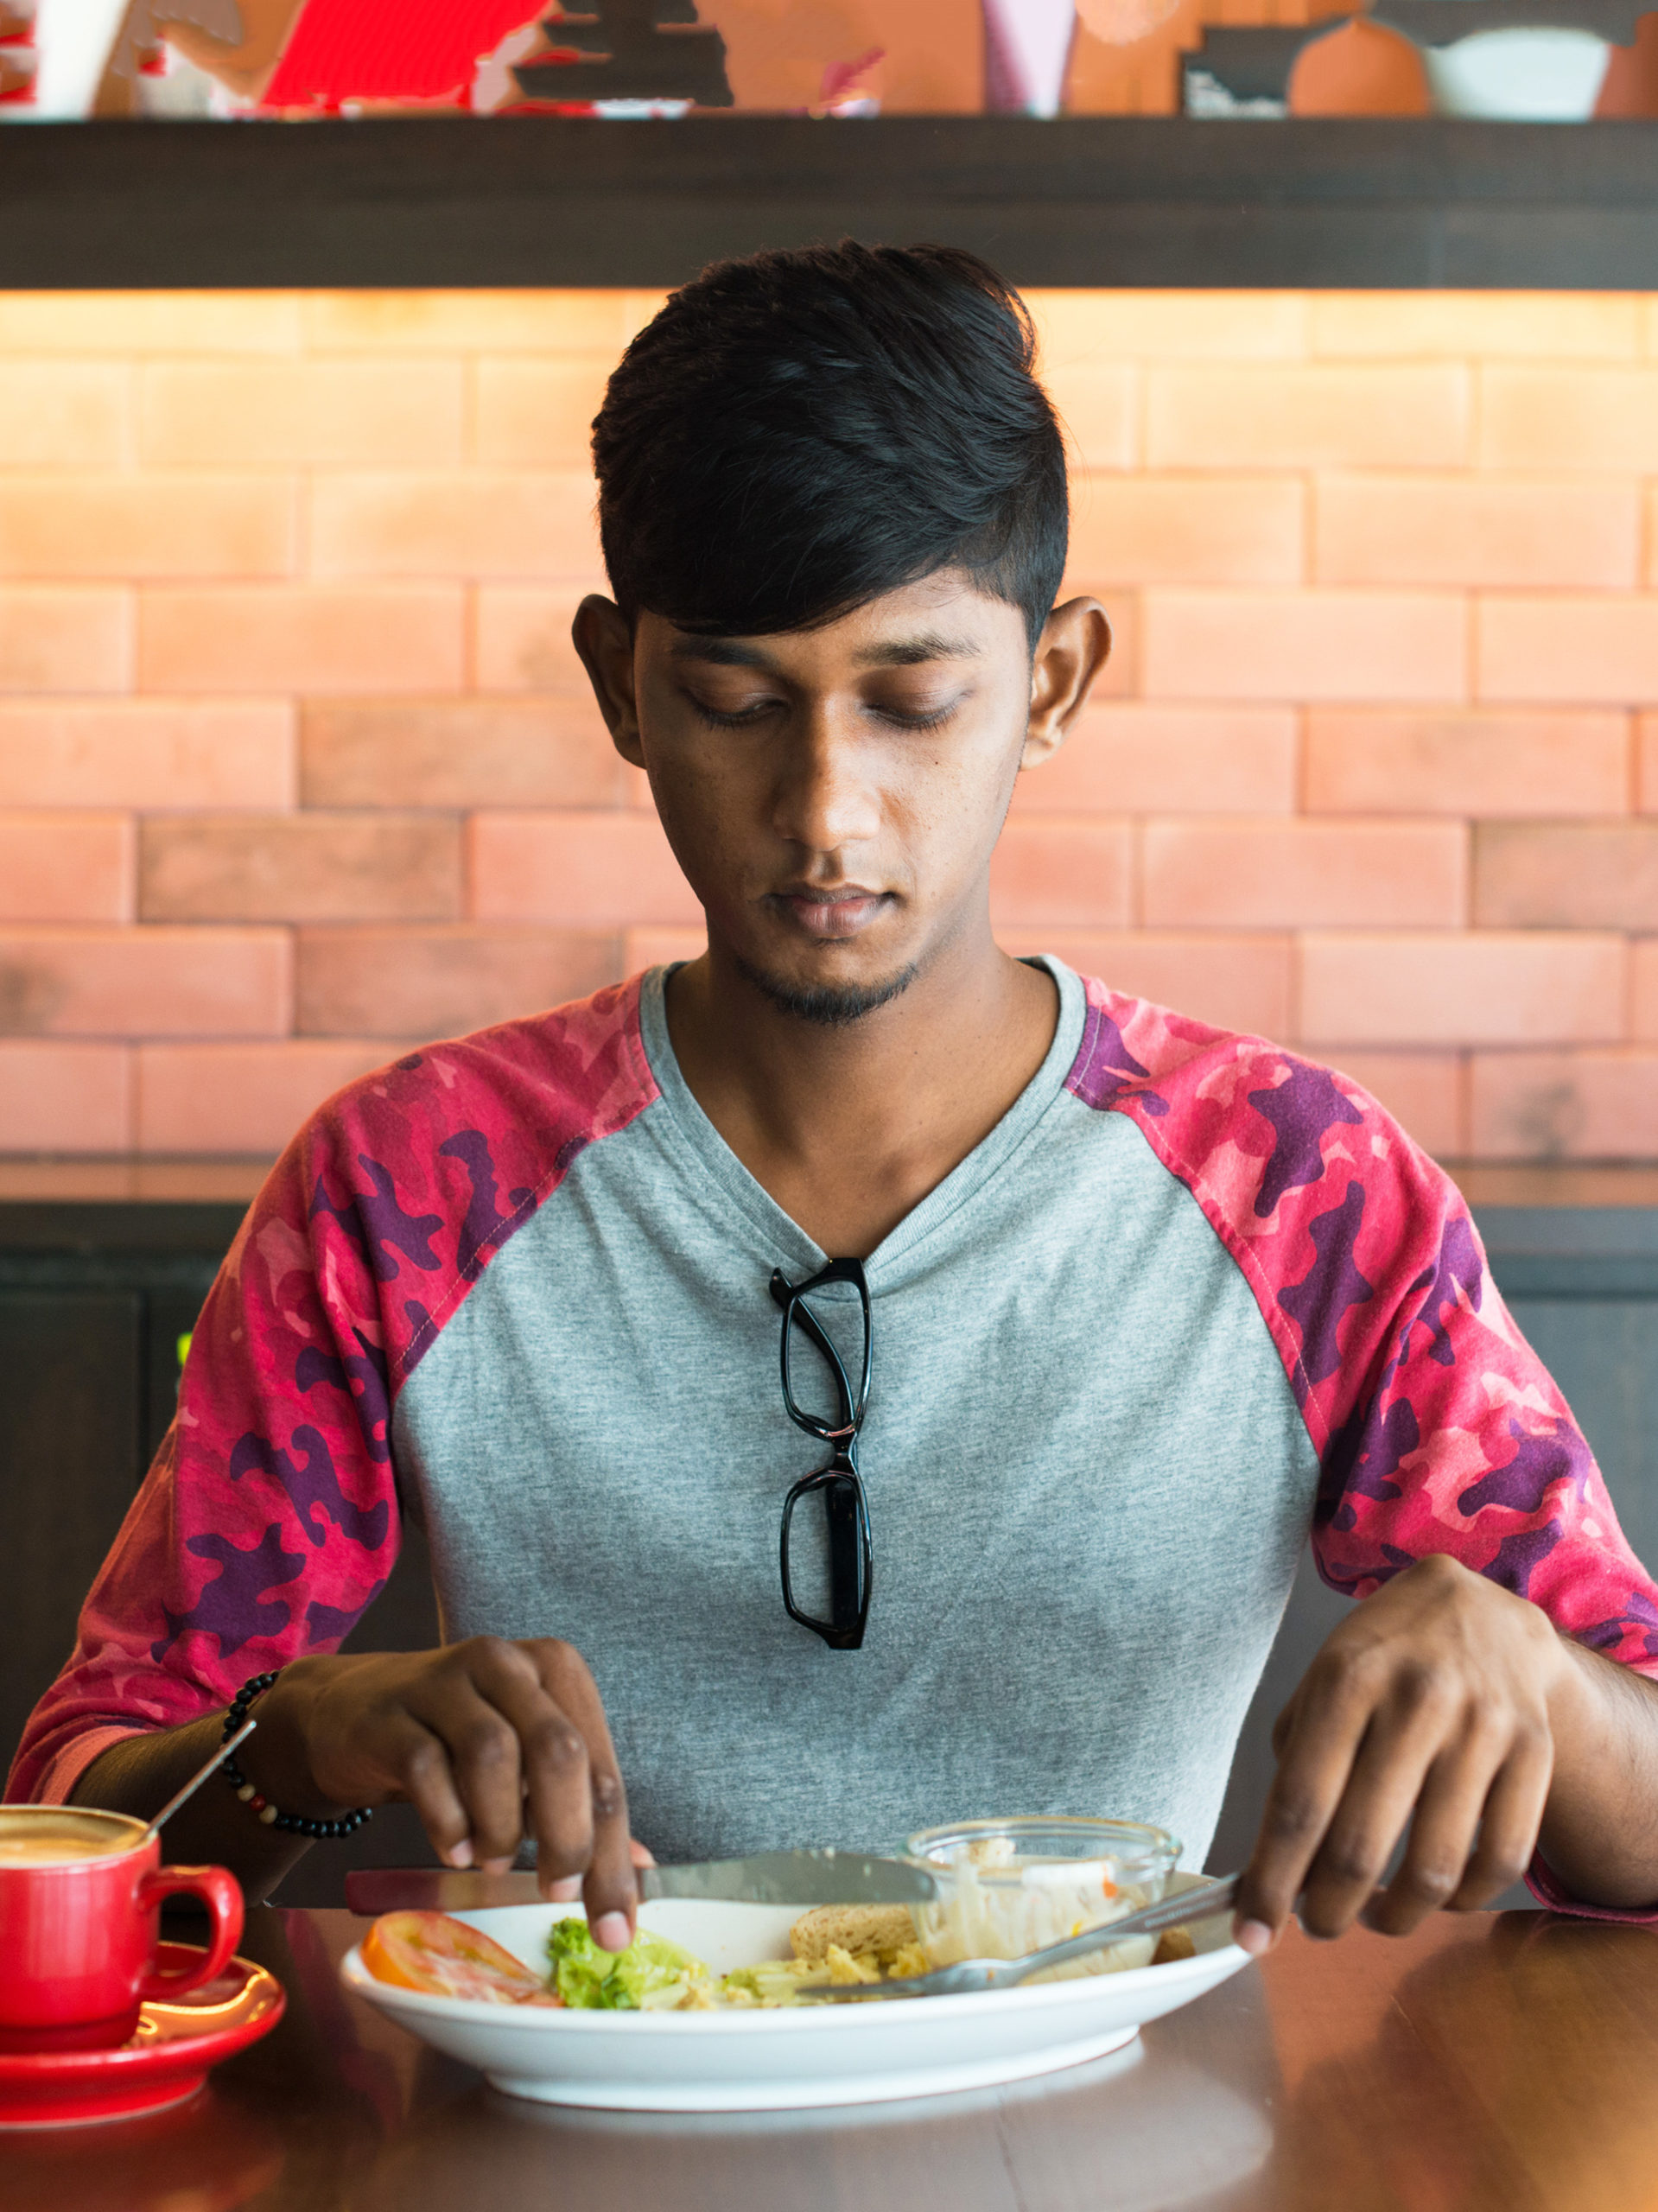 Teen sitting at table eating